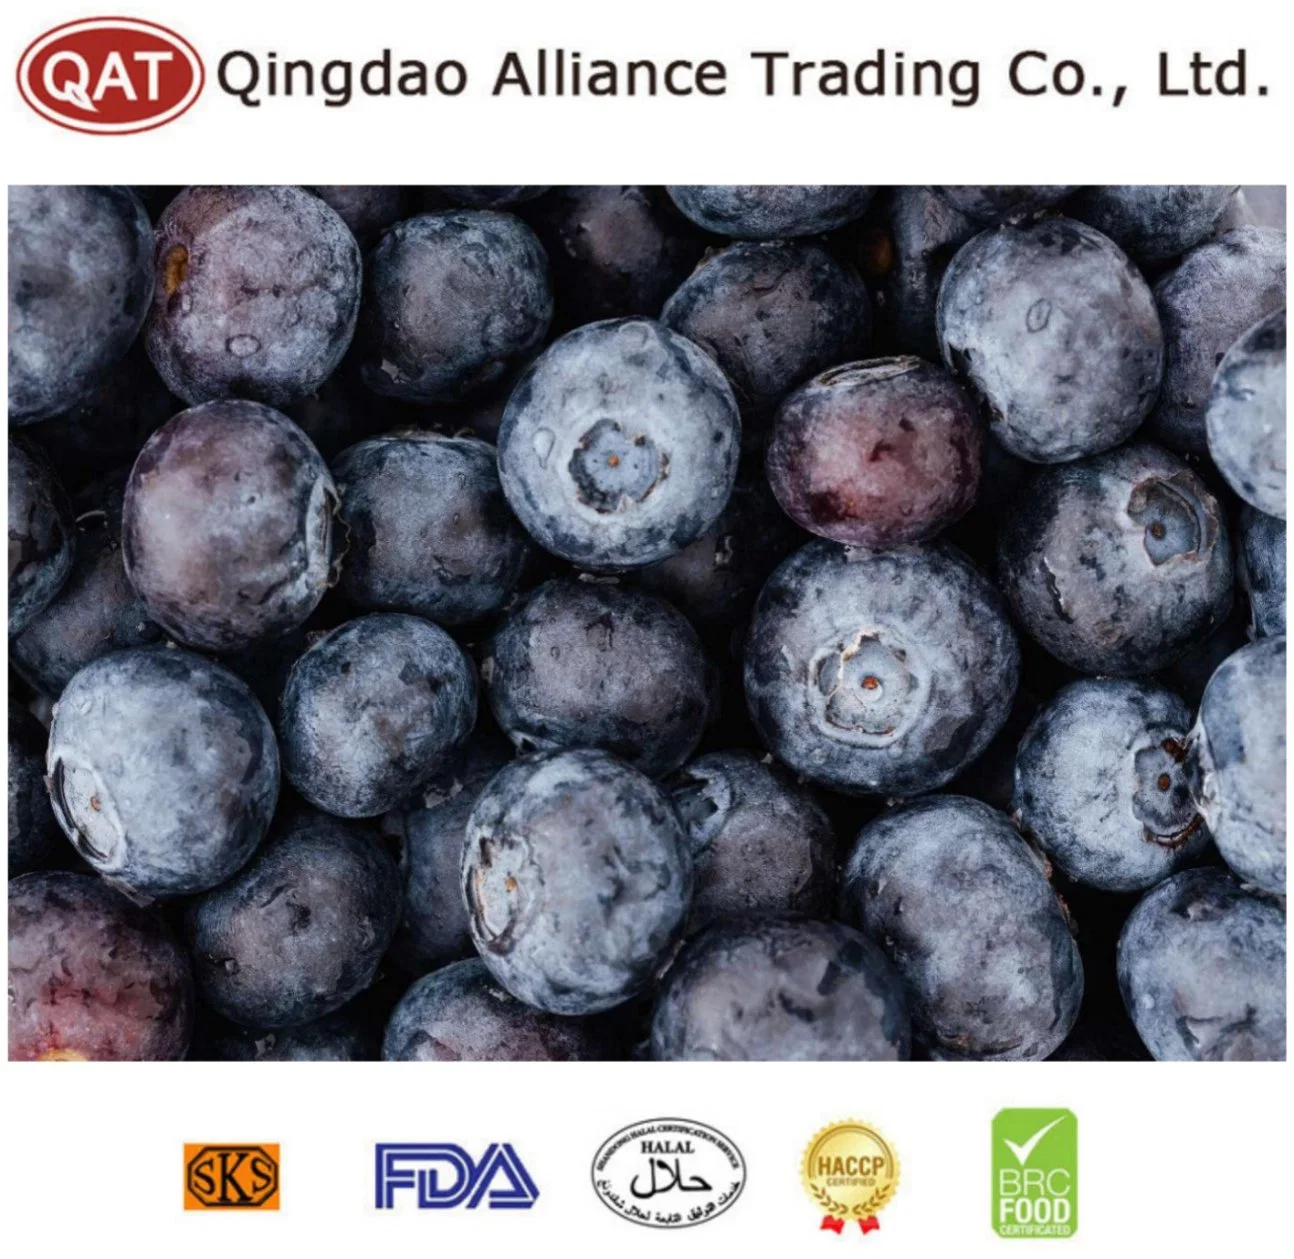 Natural Organic Frozen Blueberry with Good Price IQF and Brc Certificate